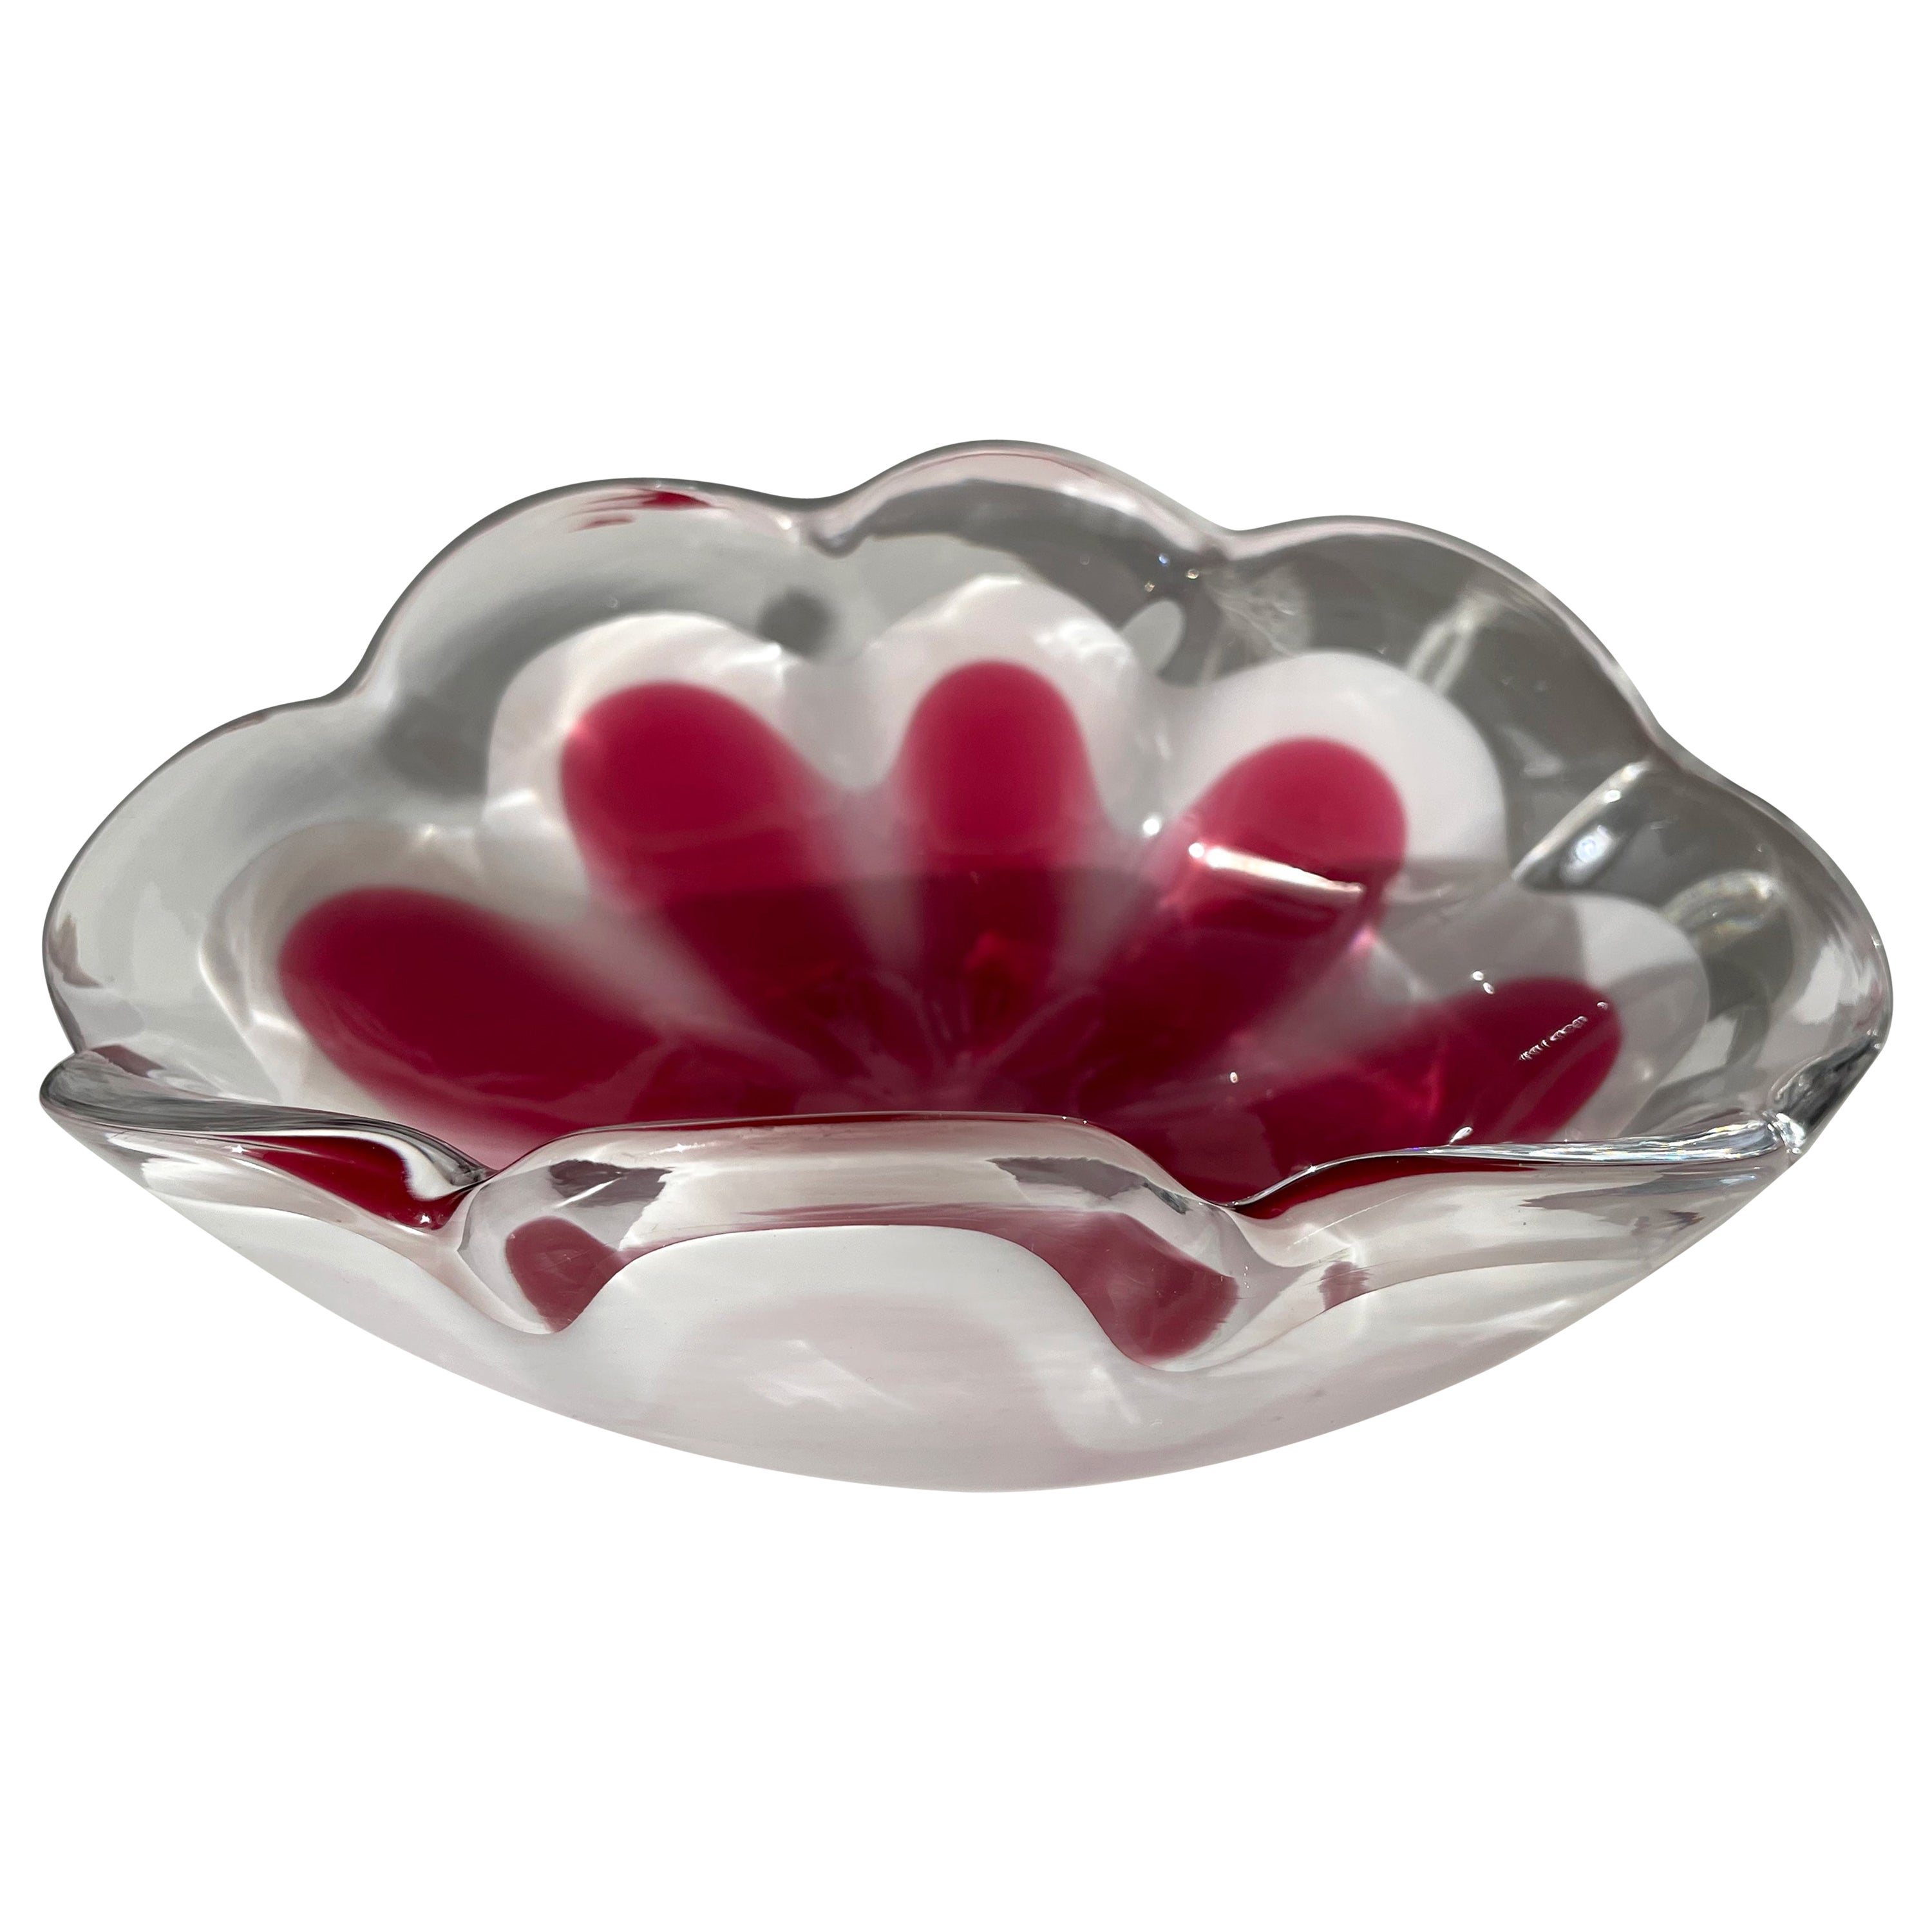 Kedelv for Flygsfors Pink, White Coquille Art Glass Bowl, 1959 For Sale